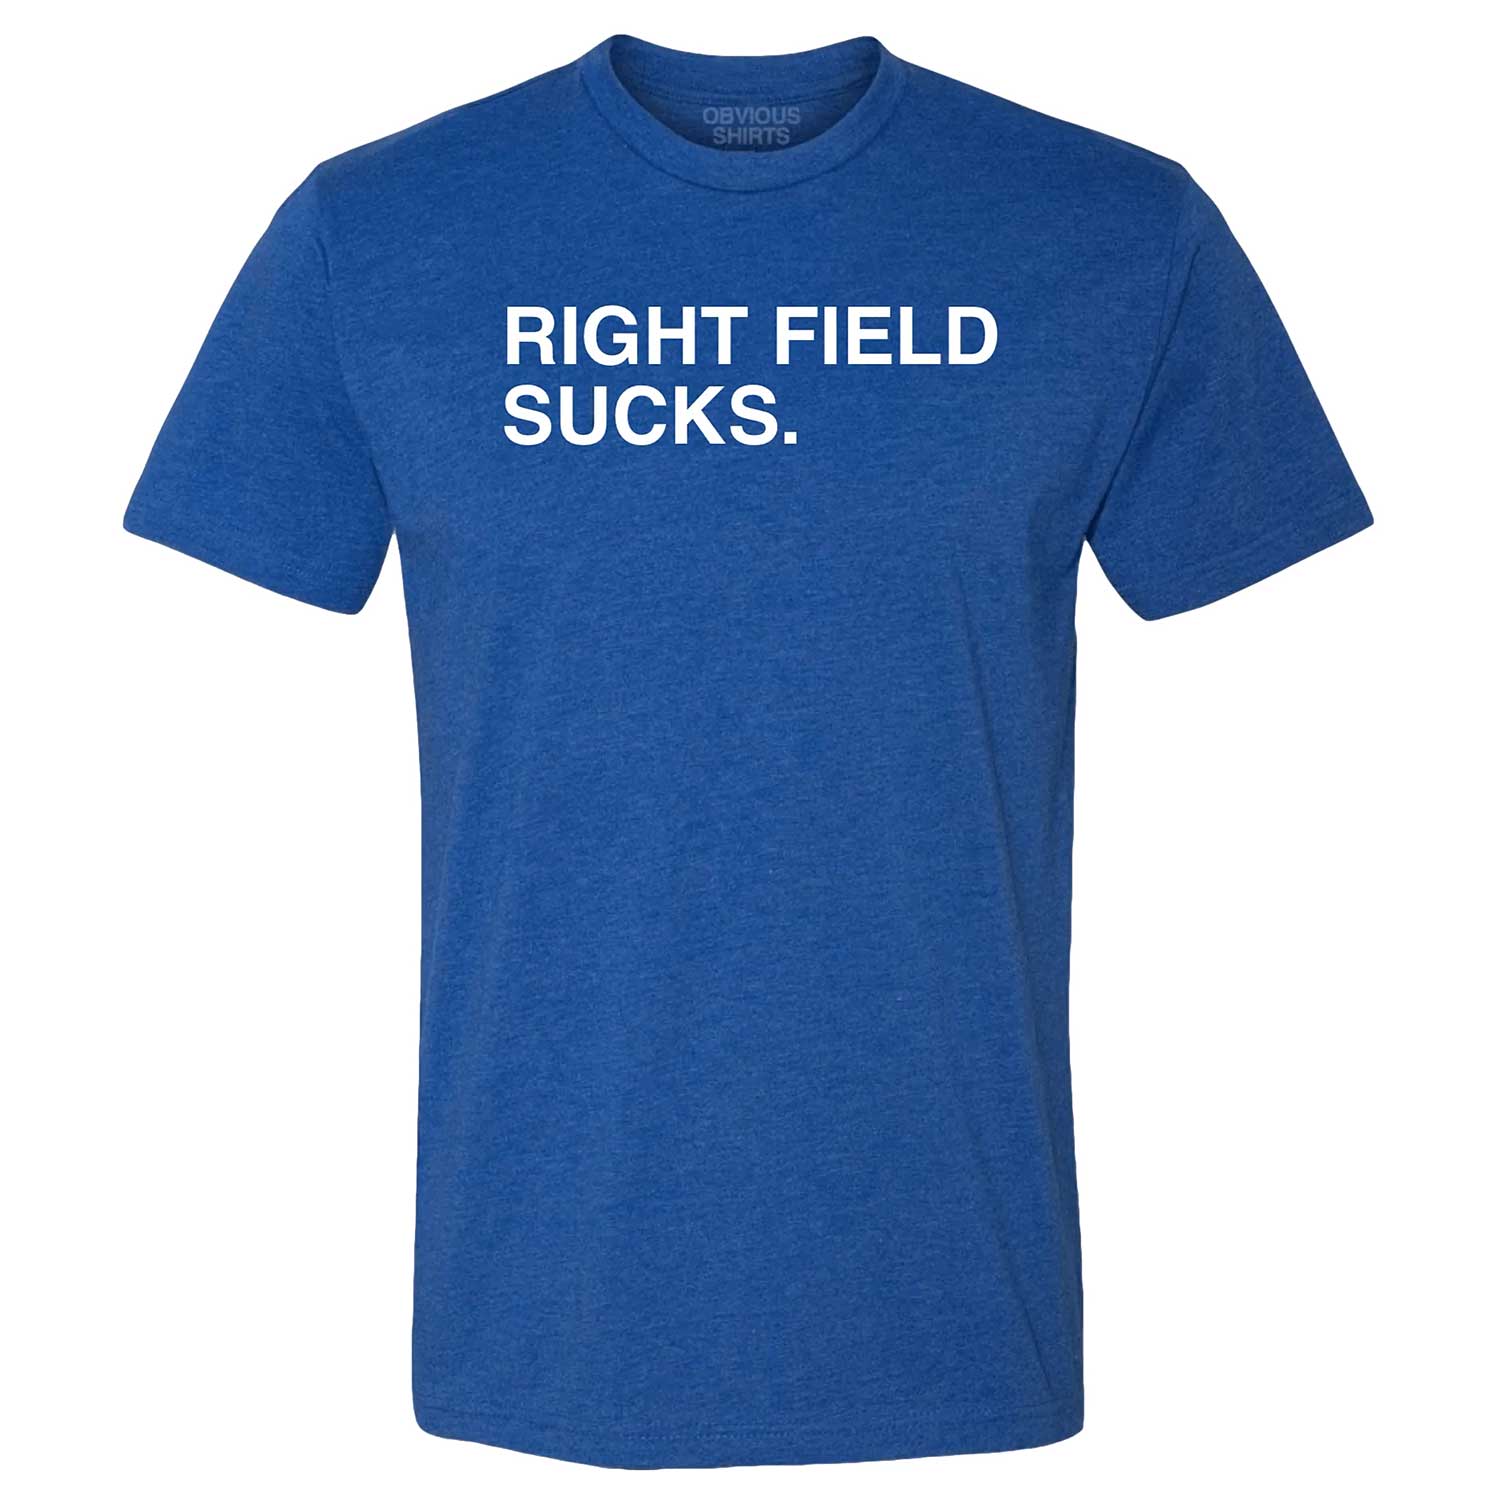 Obvious Shirts Merch Light The W Tee Chicago Cubs - AFCMerch